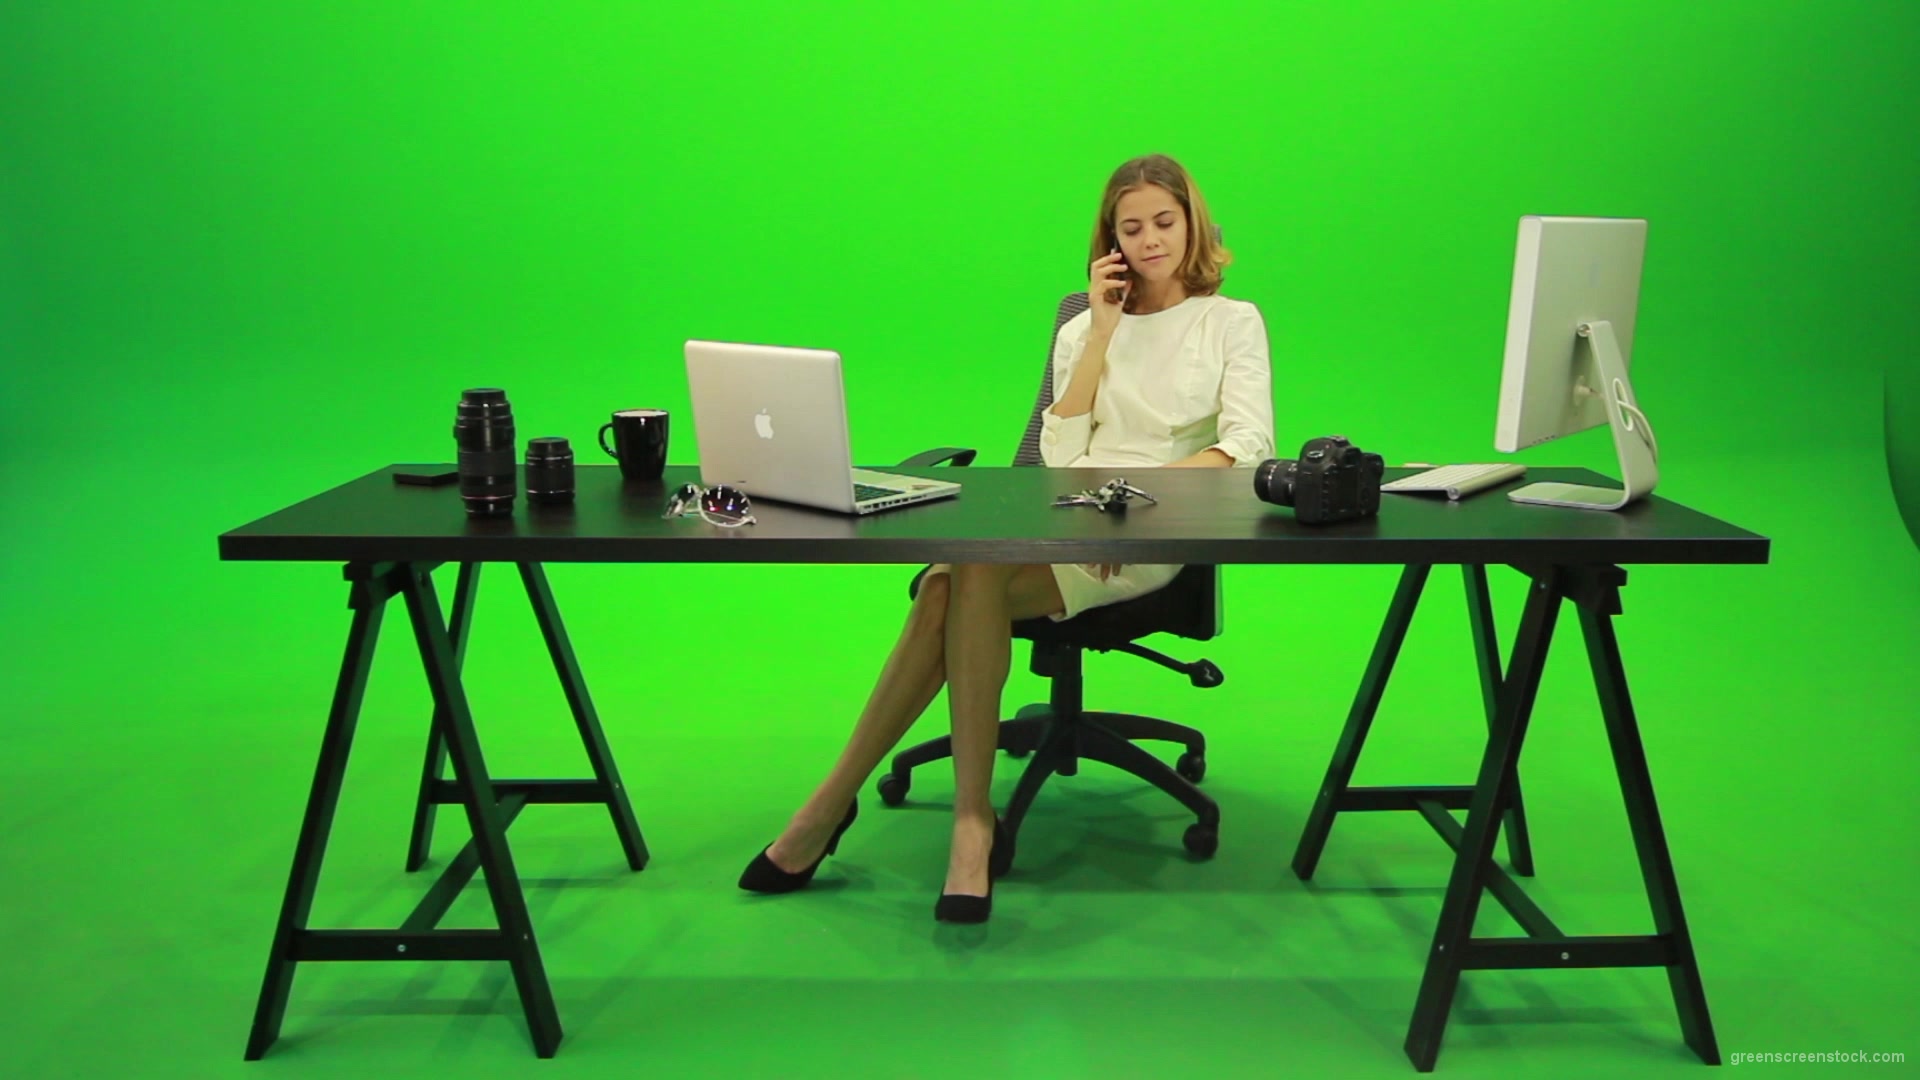 Angry-Business-Woman-Talking-on-the-Phone-Green-Screen-Footage_009 Green Screen Stock